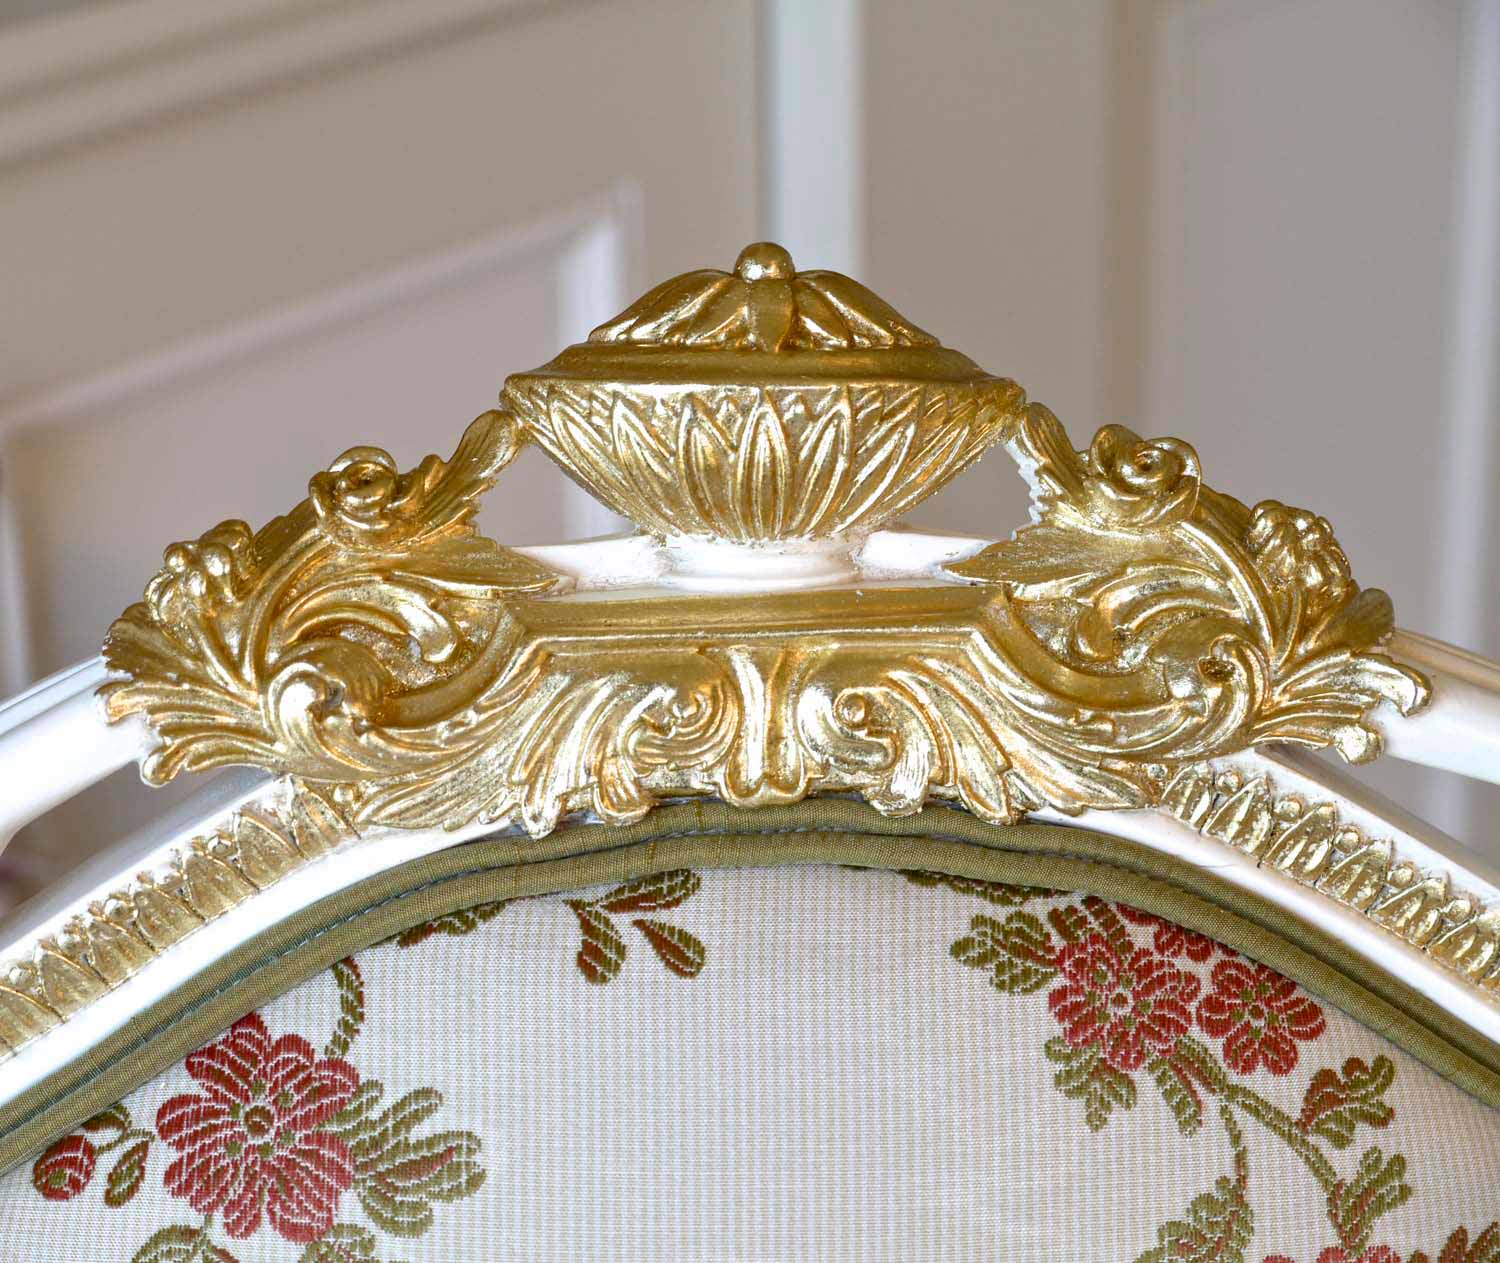 5 French gilding on floral carving of chair top with french louis fabric